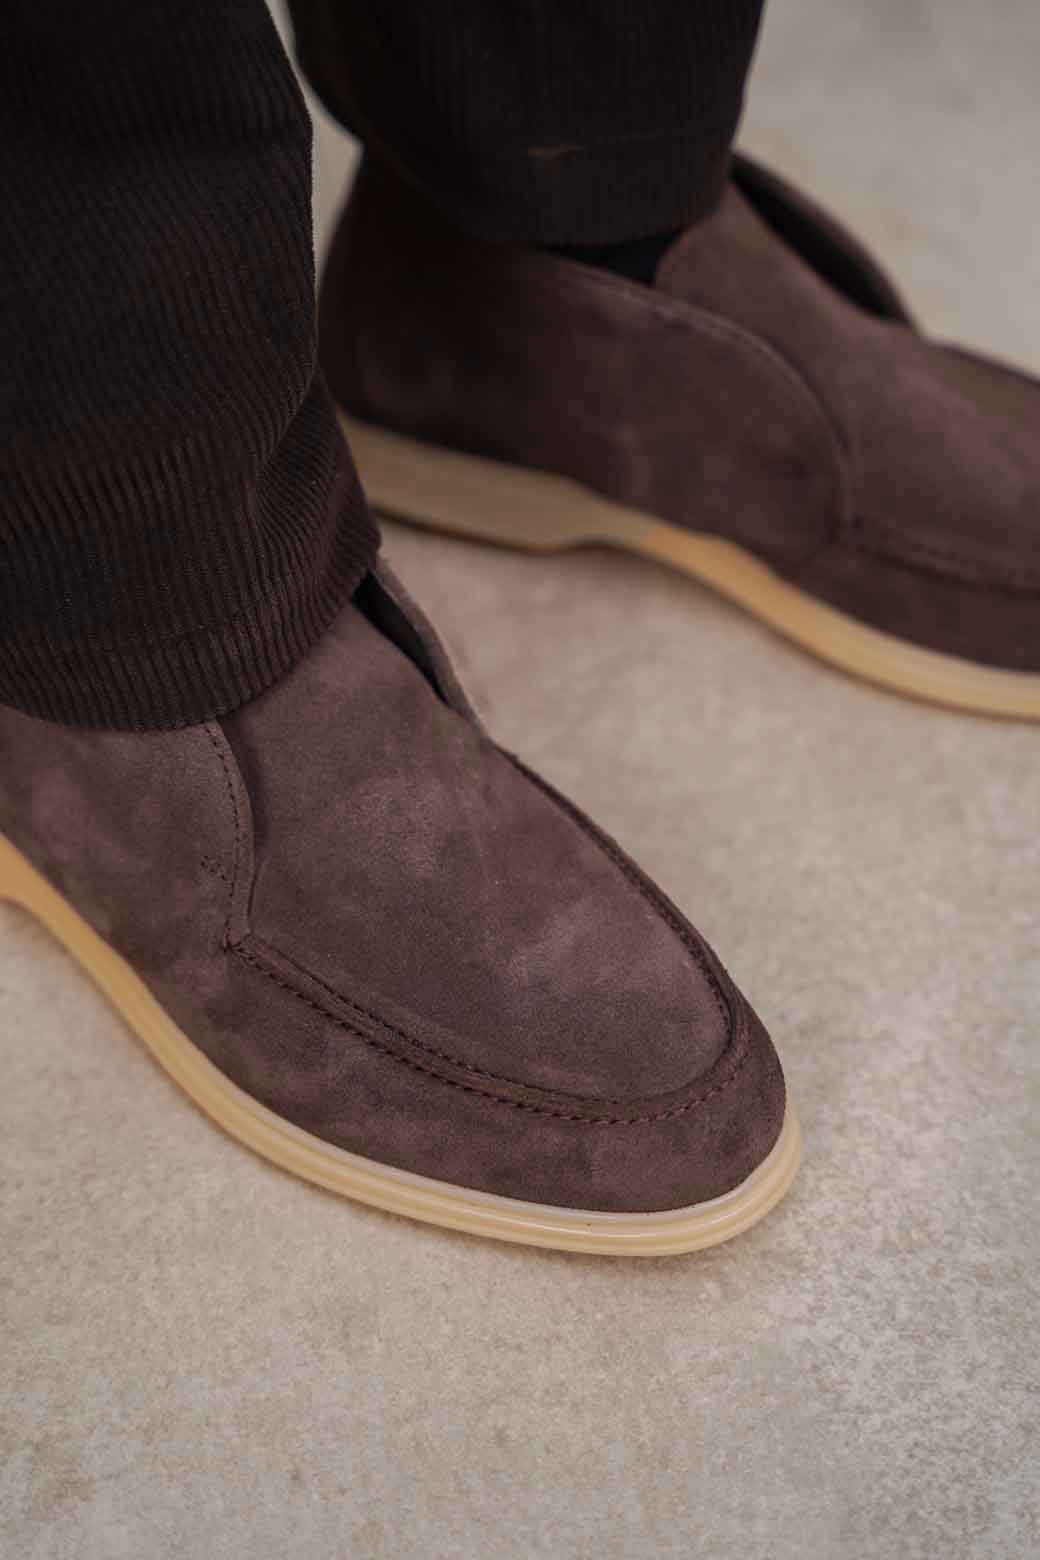 BROWN HIGH-TOP LEATHER LOAFERS